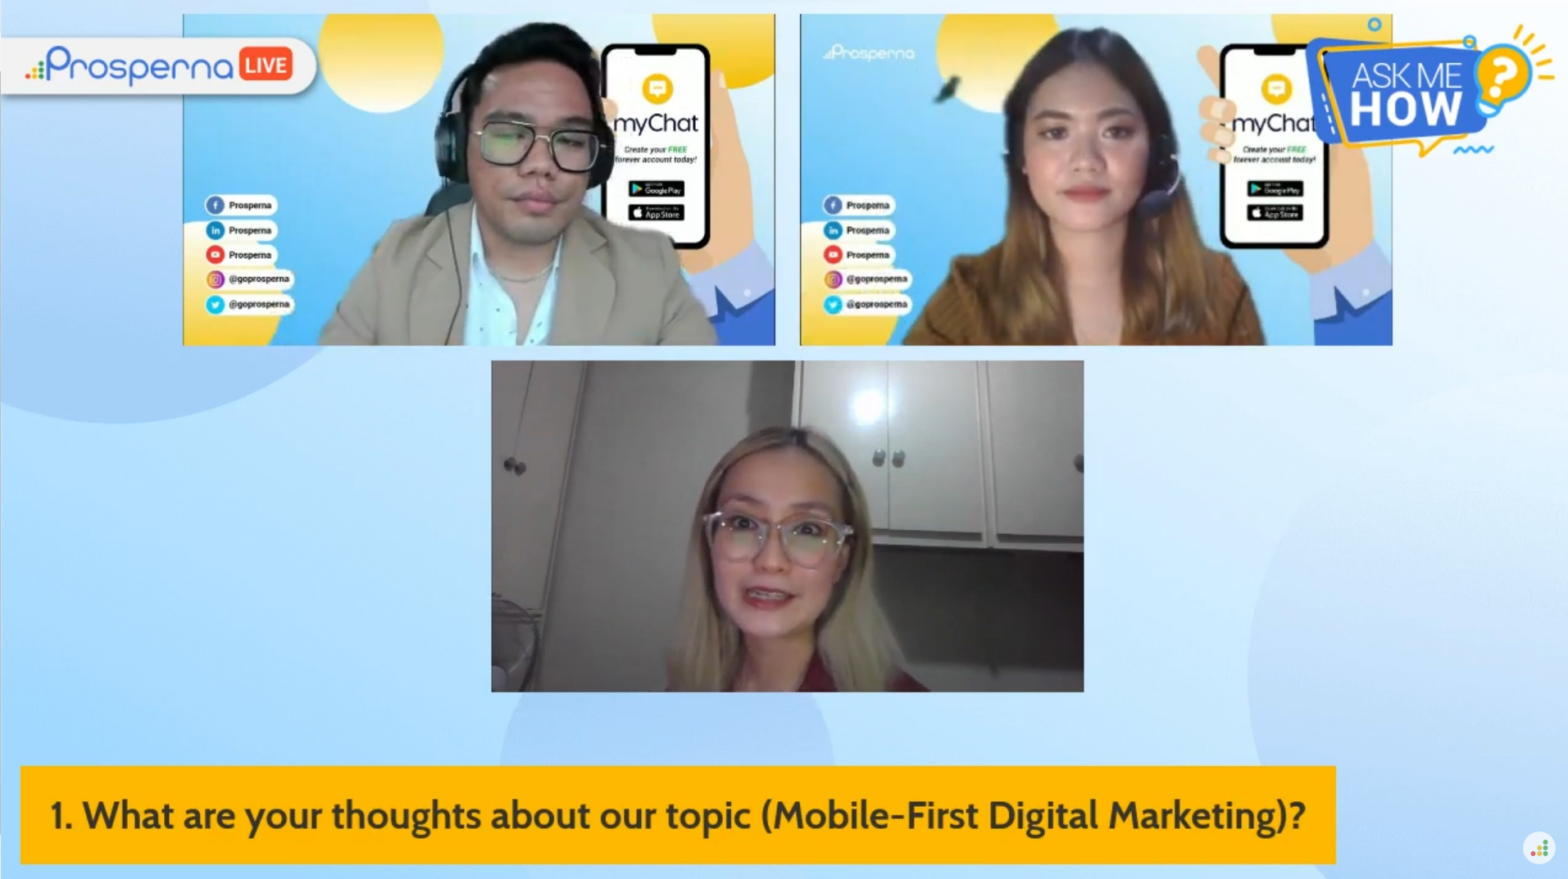 Prosperna Marketing Site | Ask Me How Special: Mobile-First Marketing in the Digital World with Claud Tejam of DITO | Prosperna